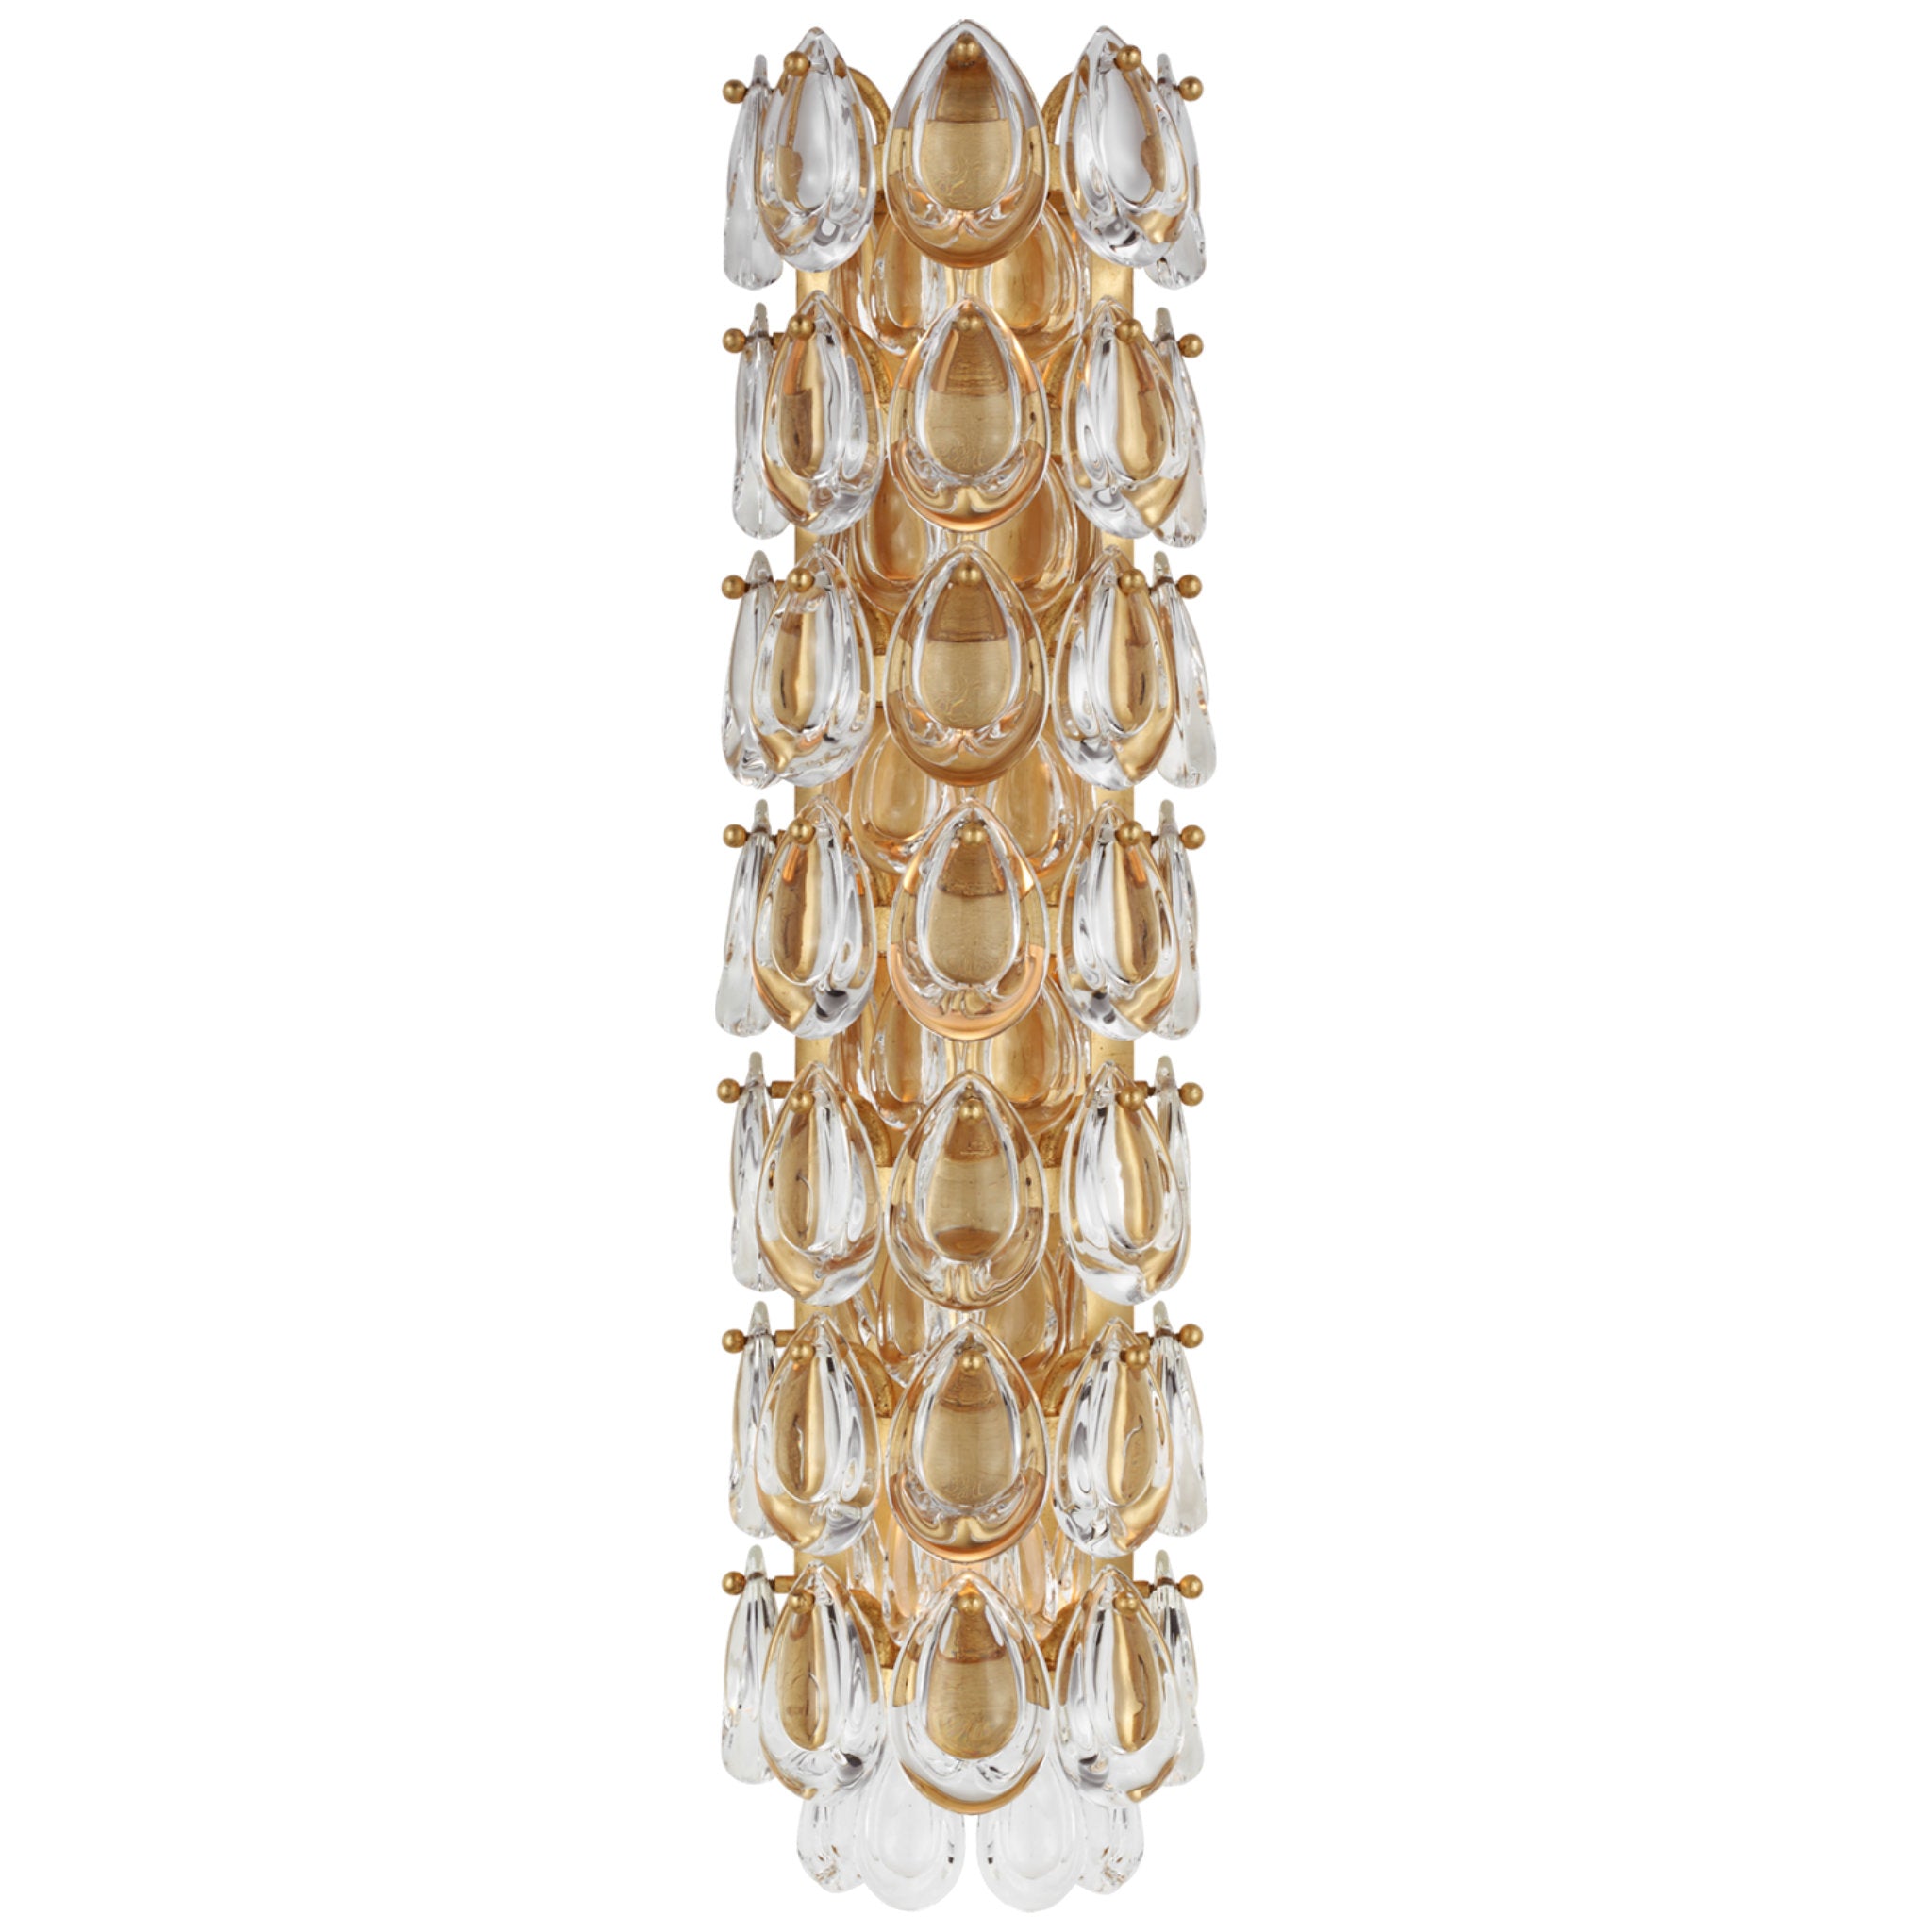 AERIN Liscia 22" Sconce in Gild with Crystal